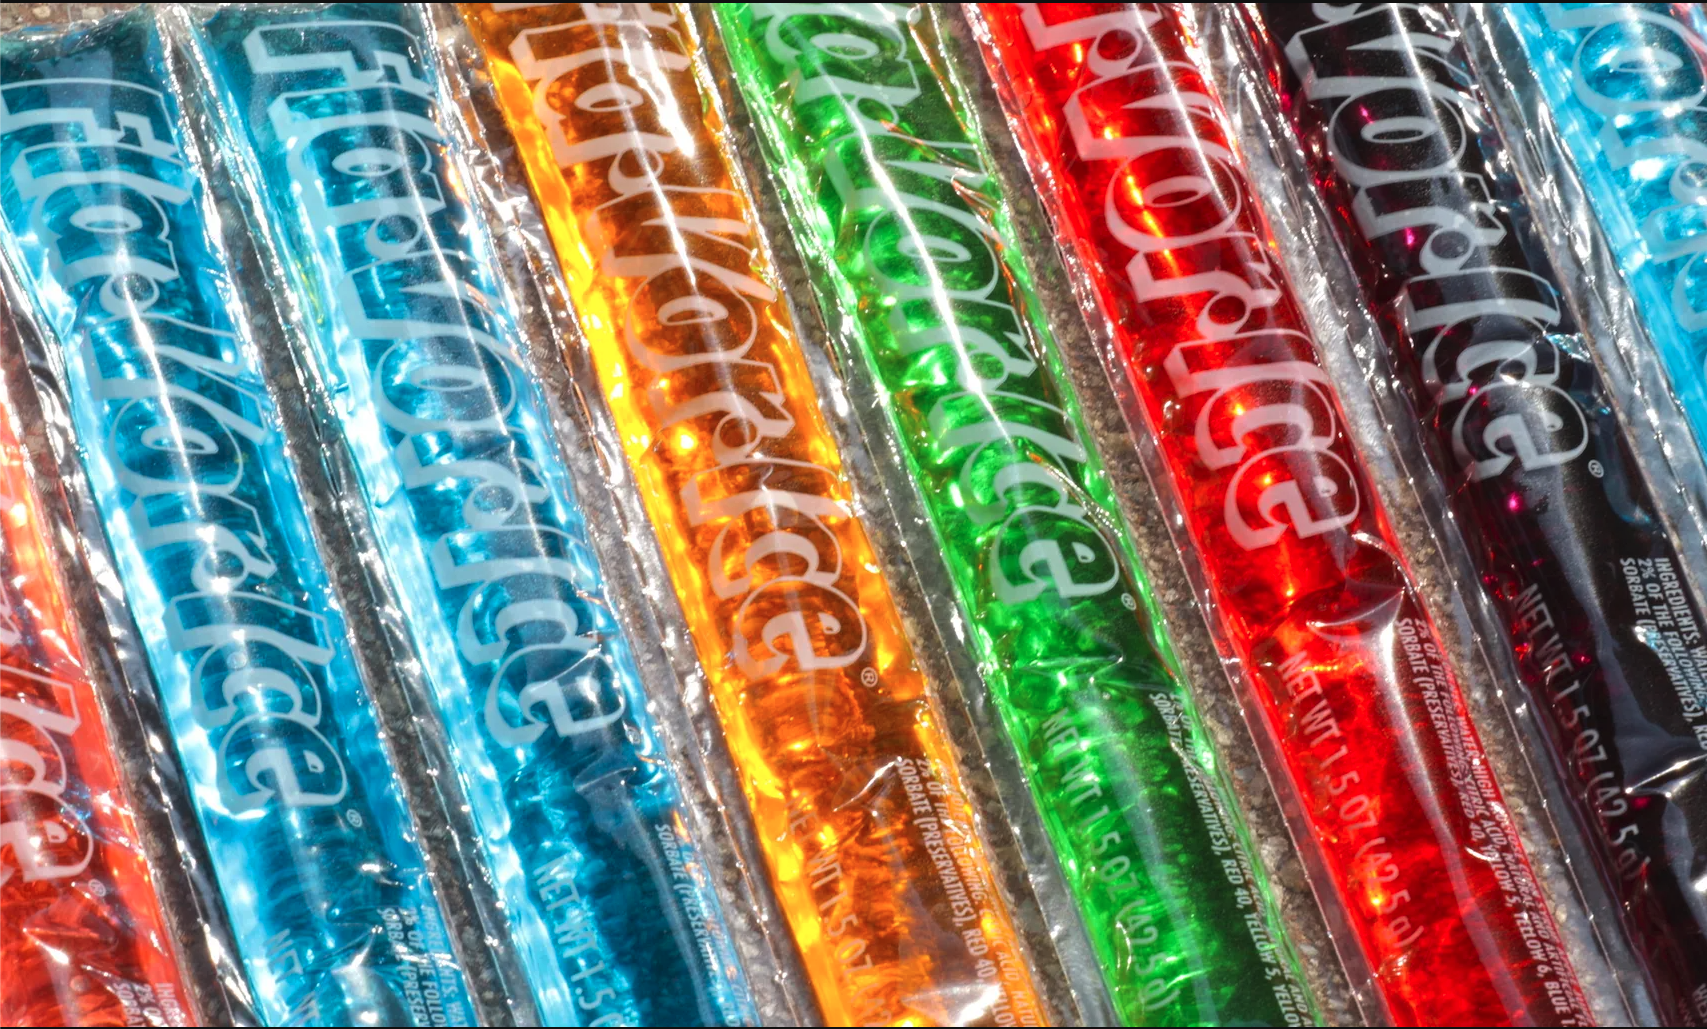 A picture of a pack of Flavor Ice